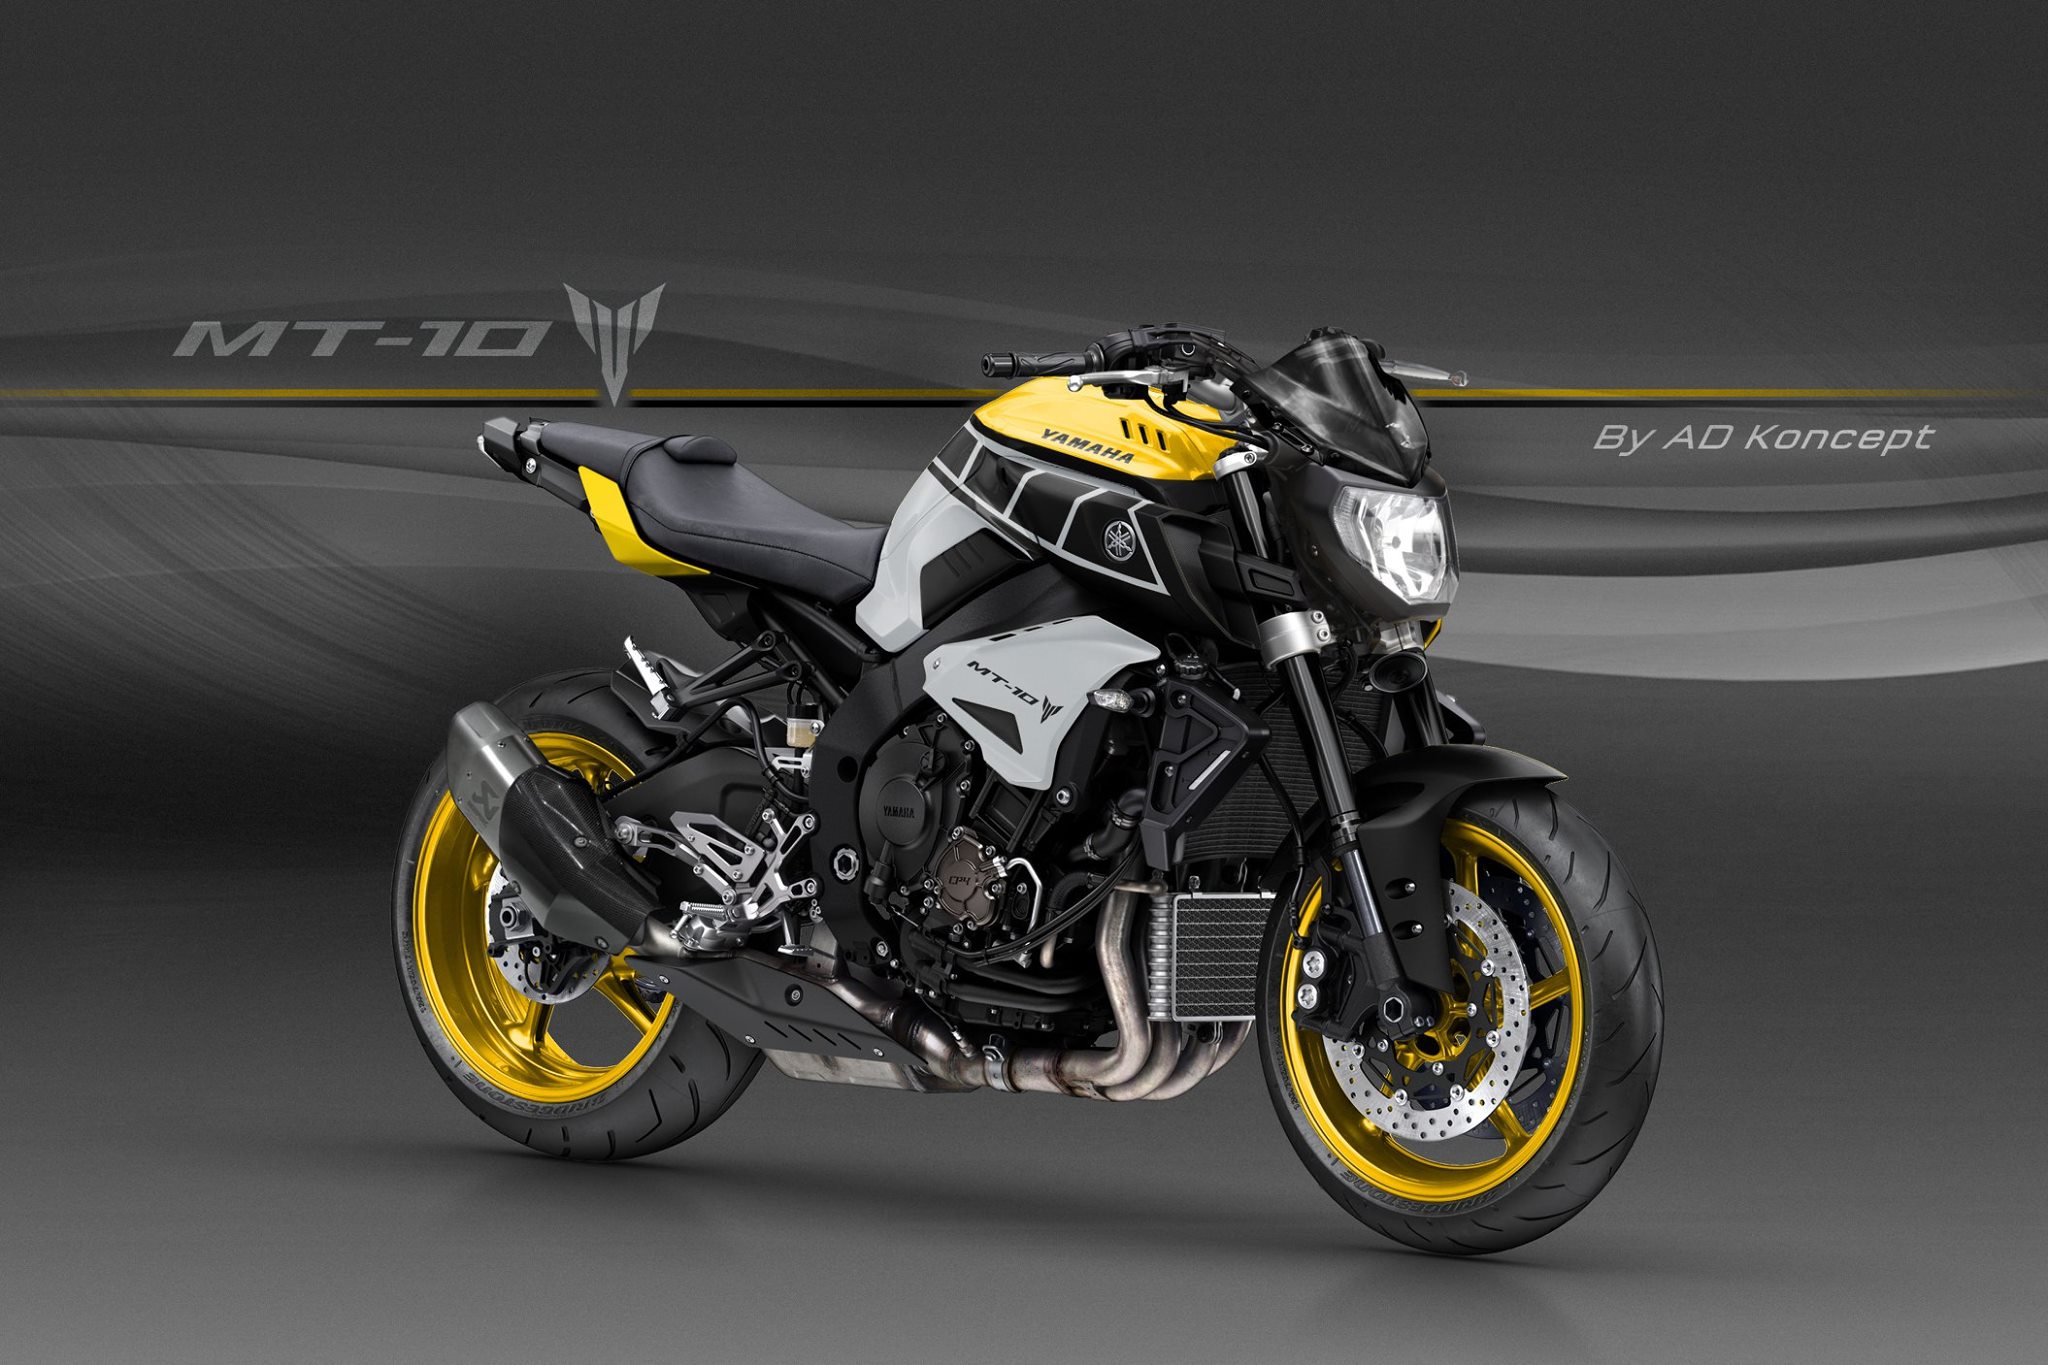 yamaha-mt-10-in-valentino-rossi-livery-and-more-from-ad-koncept_10.jpg